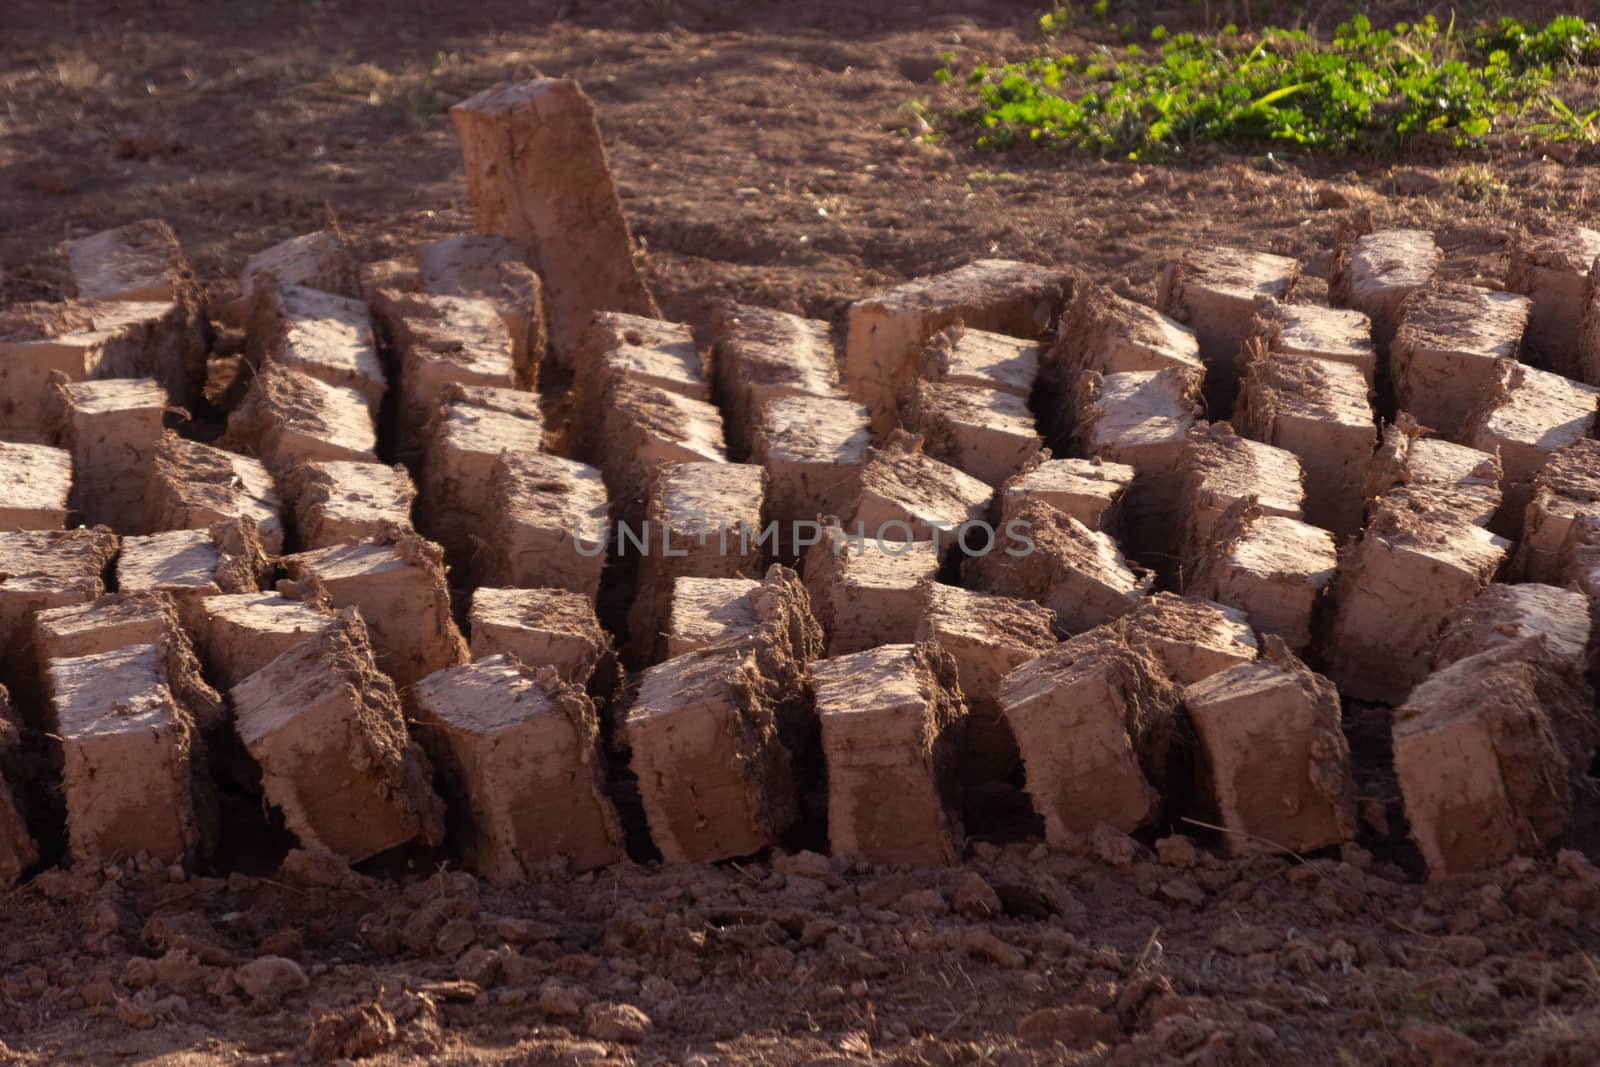 Mud or clay bricks at Ait Ben Haddou ksar Morocco, a Unesco World Heritage site by kgboxford